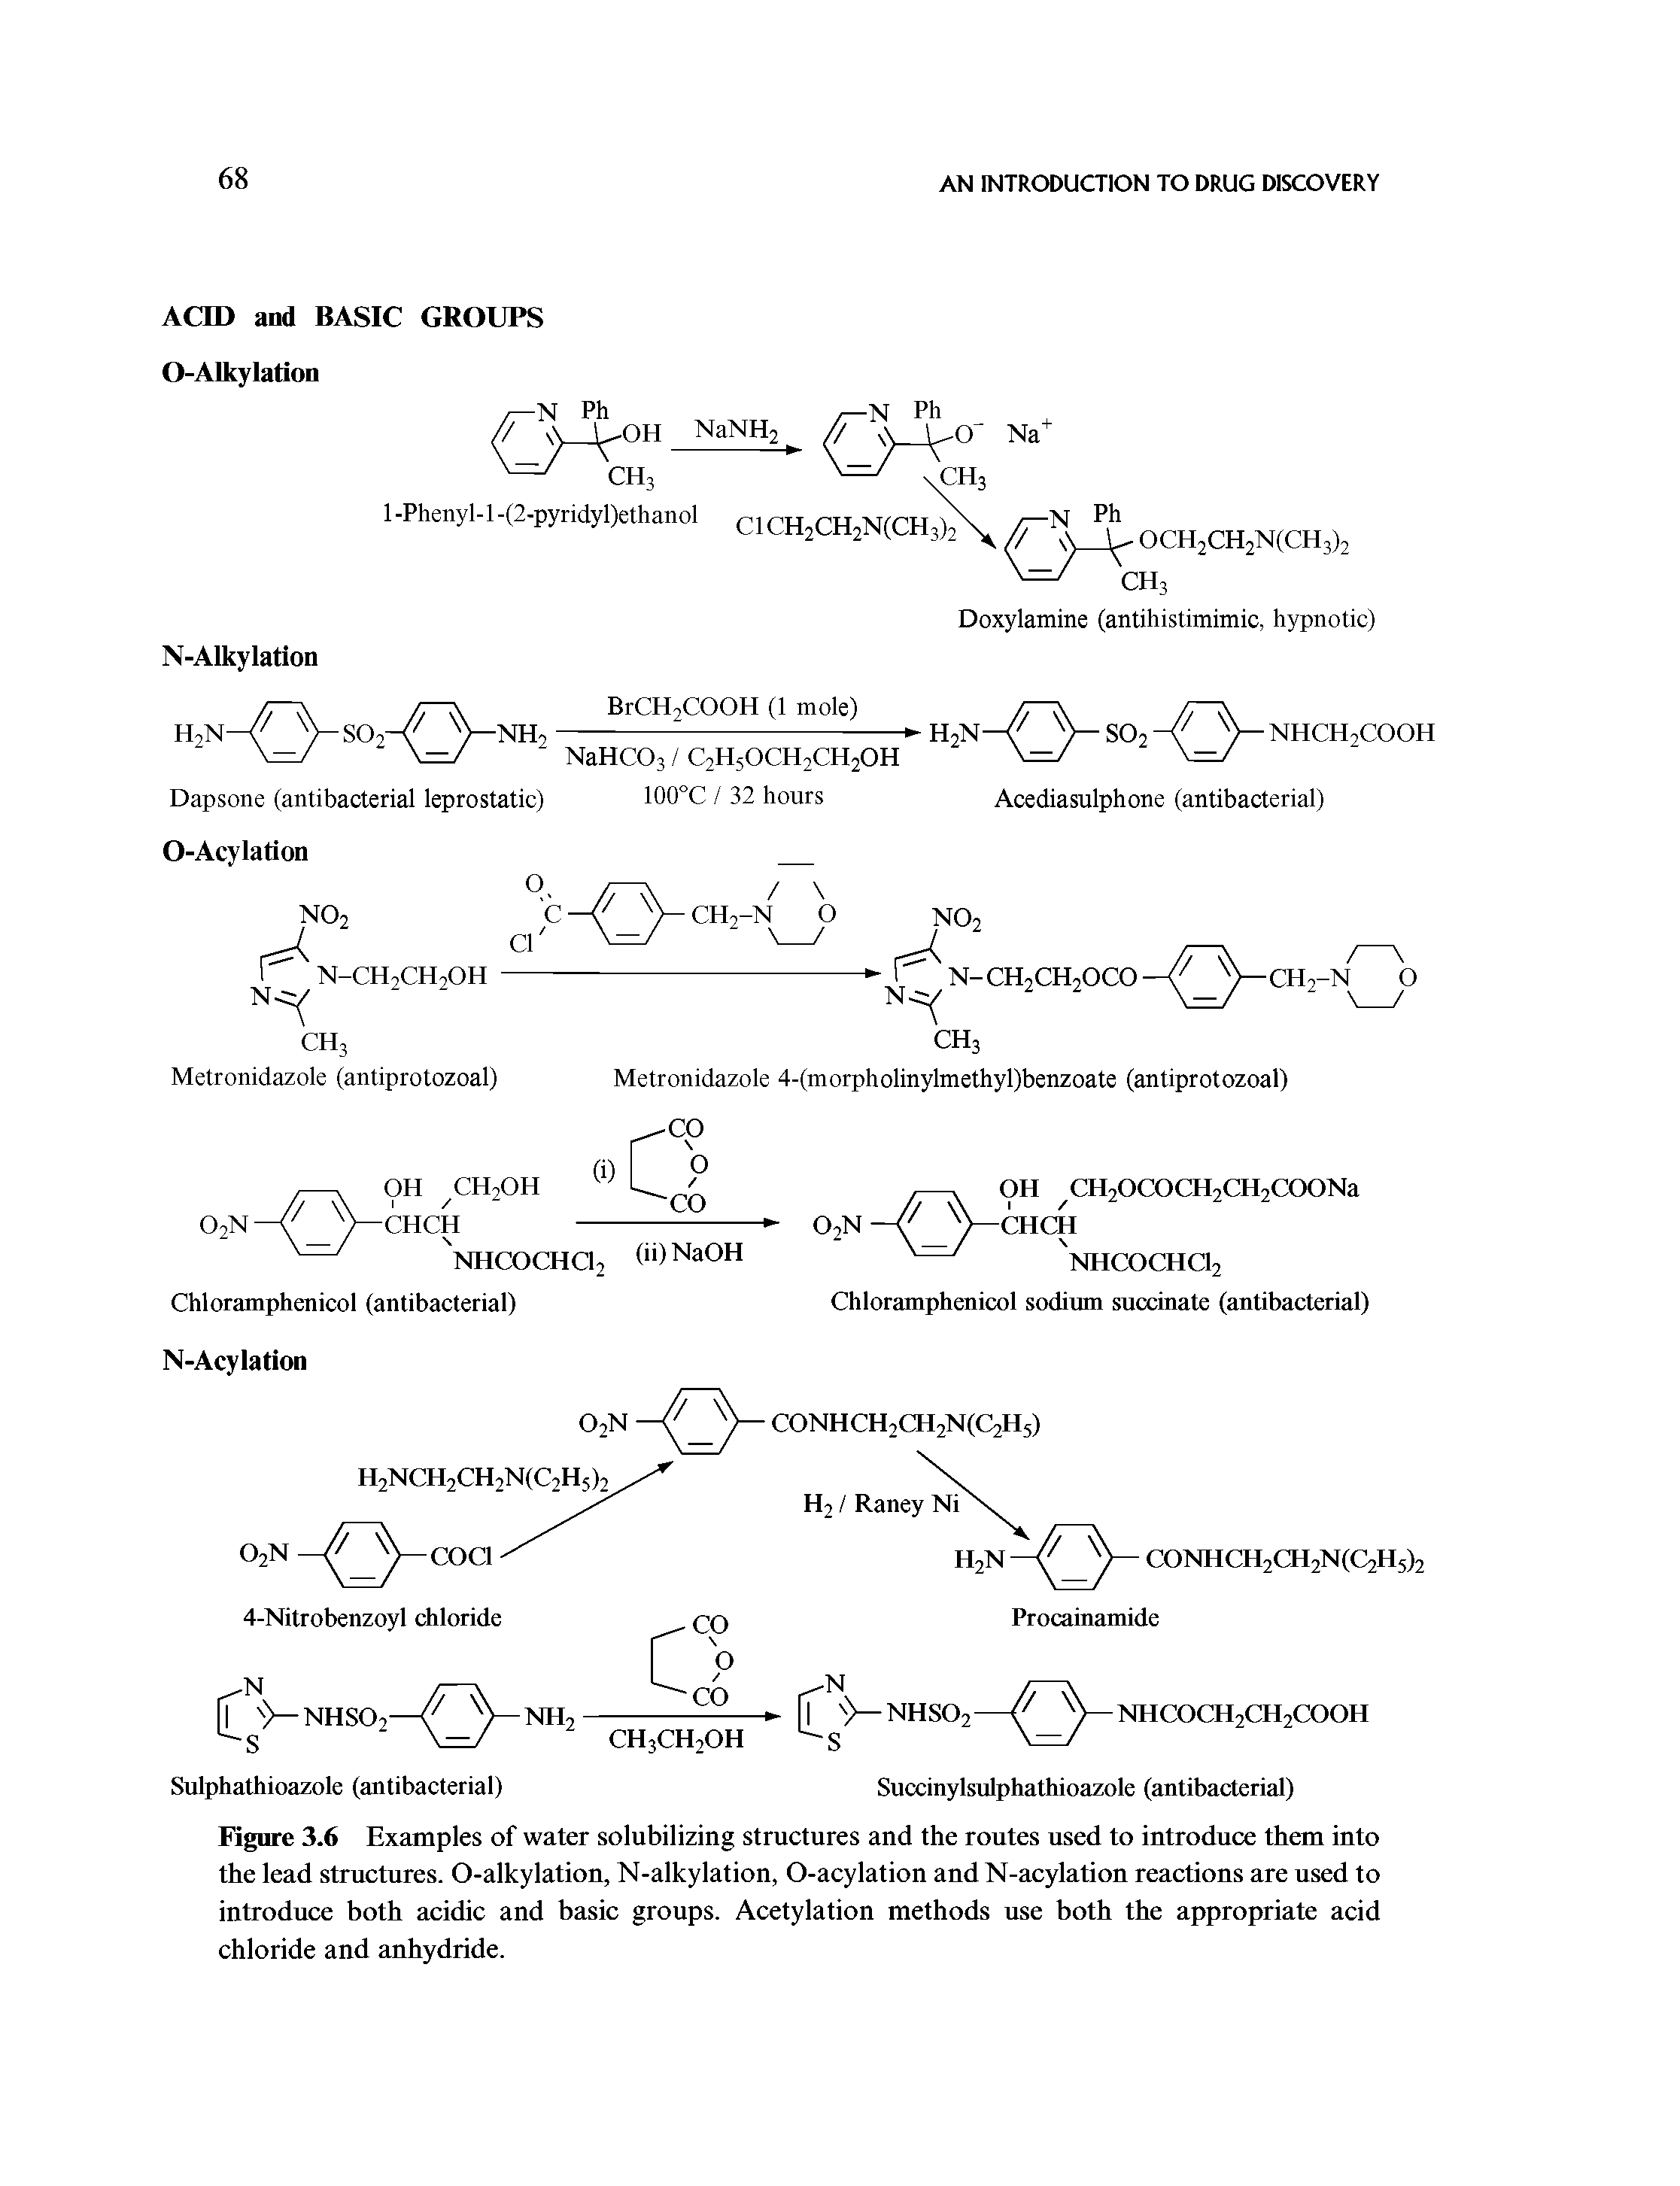 Figure 3.6 Examples of water solubilizing structures and the routes used to introduce them into the lead structures. O-alkylation, N-alkylation, O-acylation and N-acylation reactions are used to introduce both acidic and basic groups. Acetylation methods use both the appropriate acid chloride and anhydride.